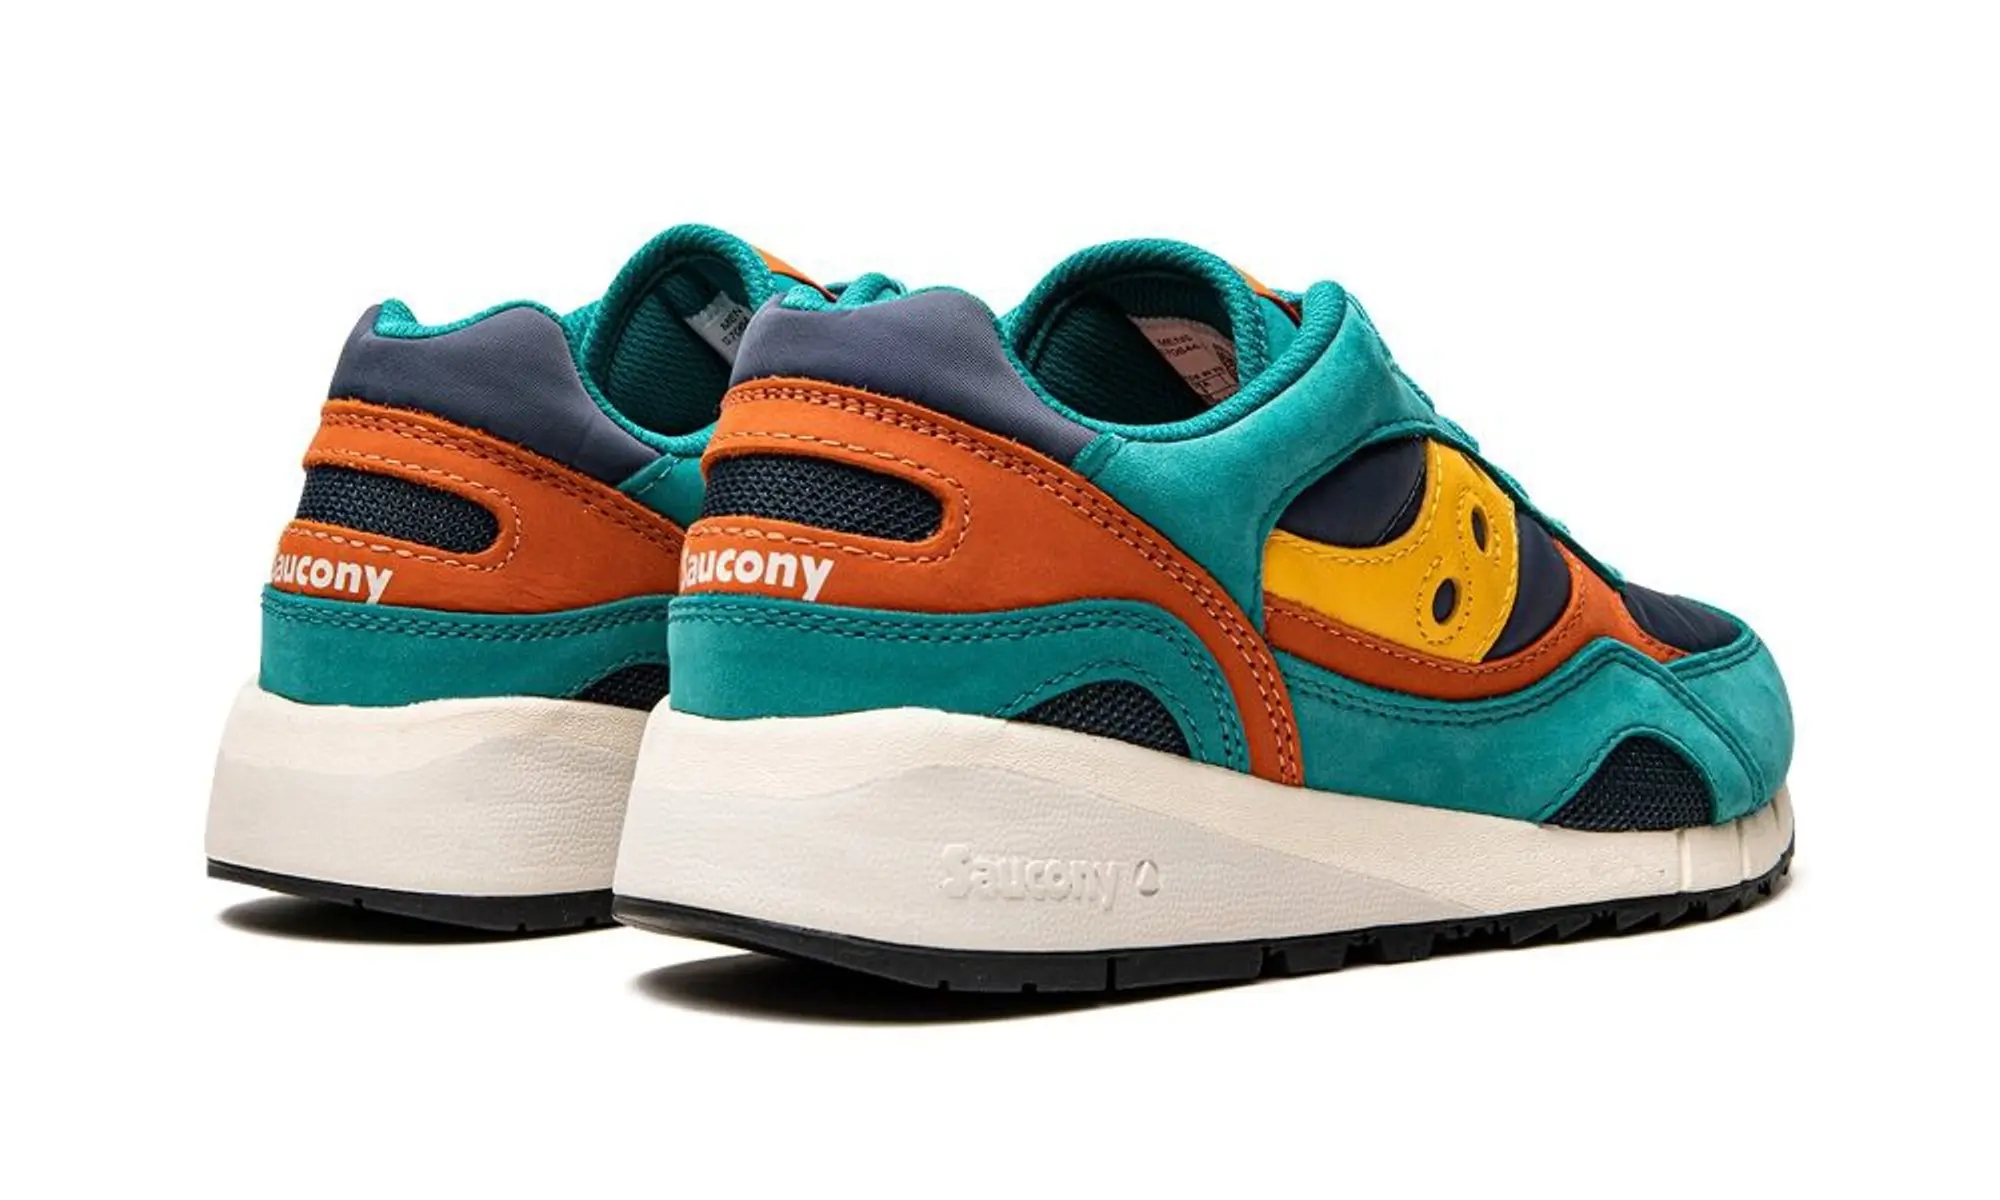 Saucony Shadow 6000 Changing Tides Shoes